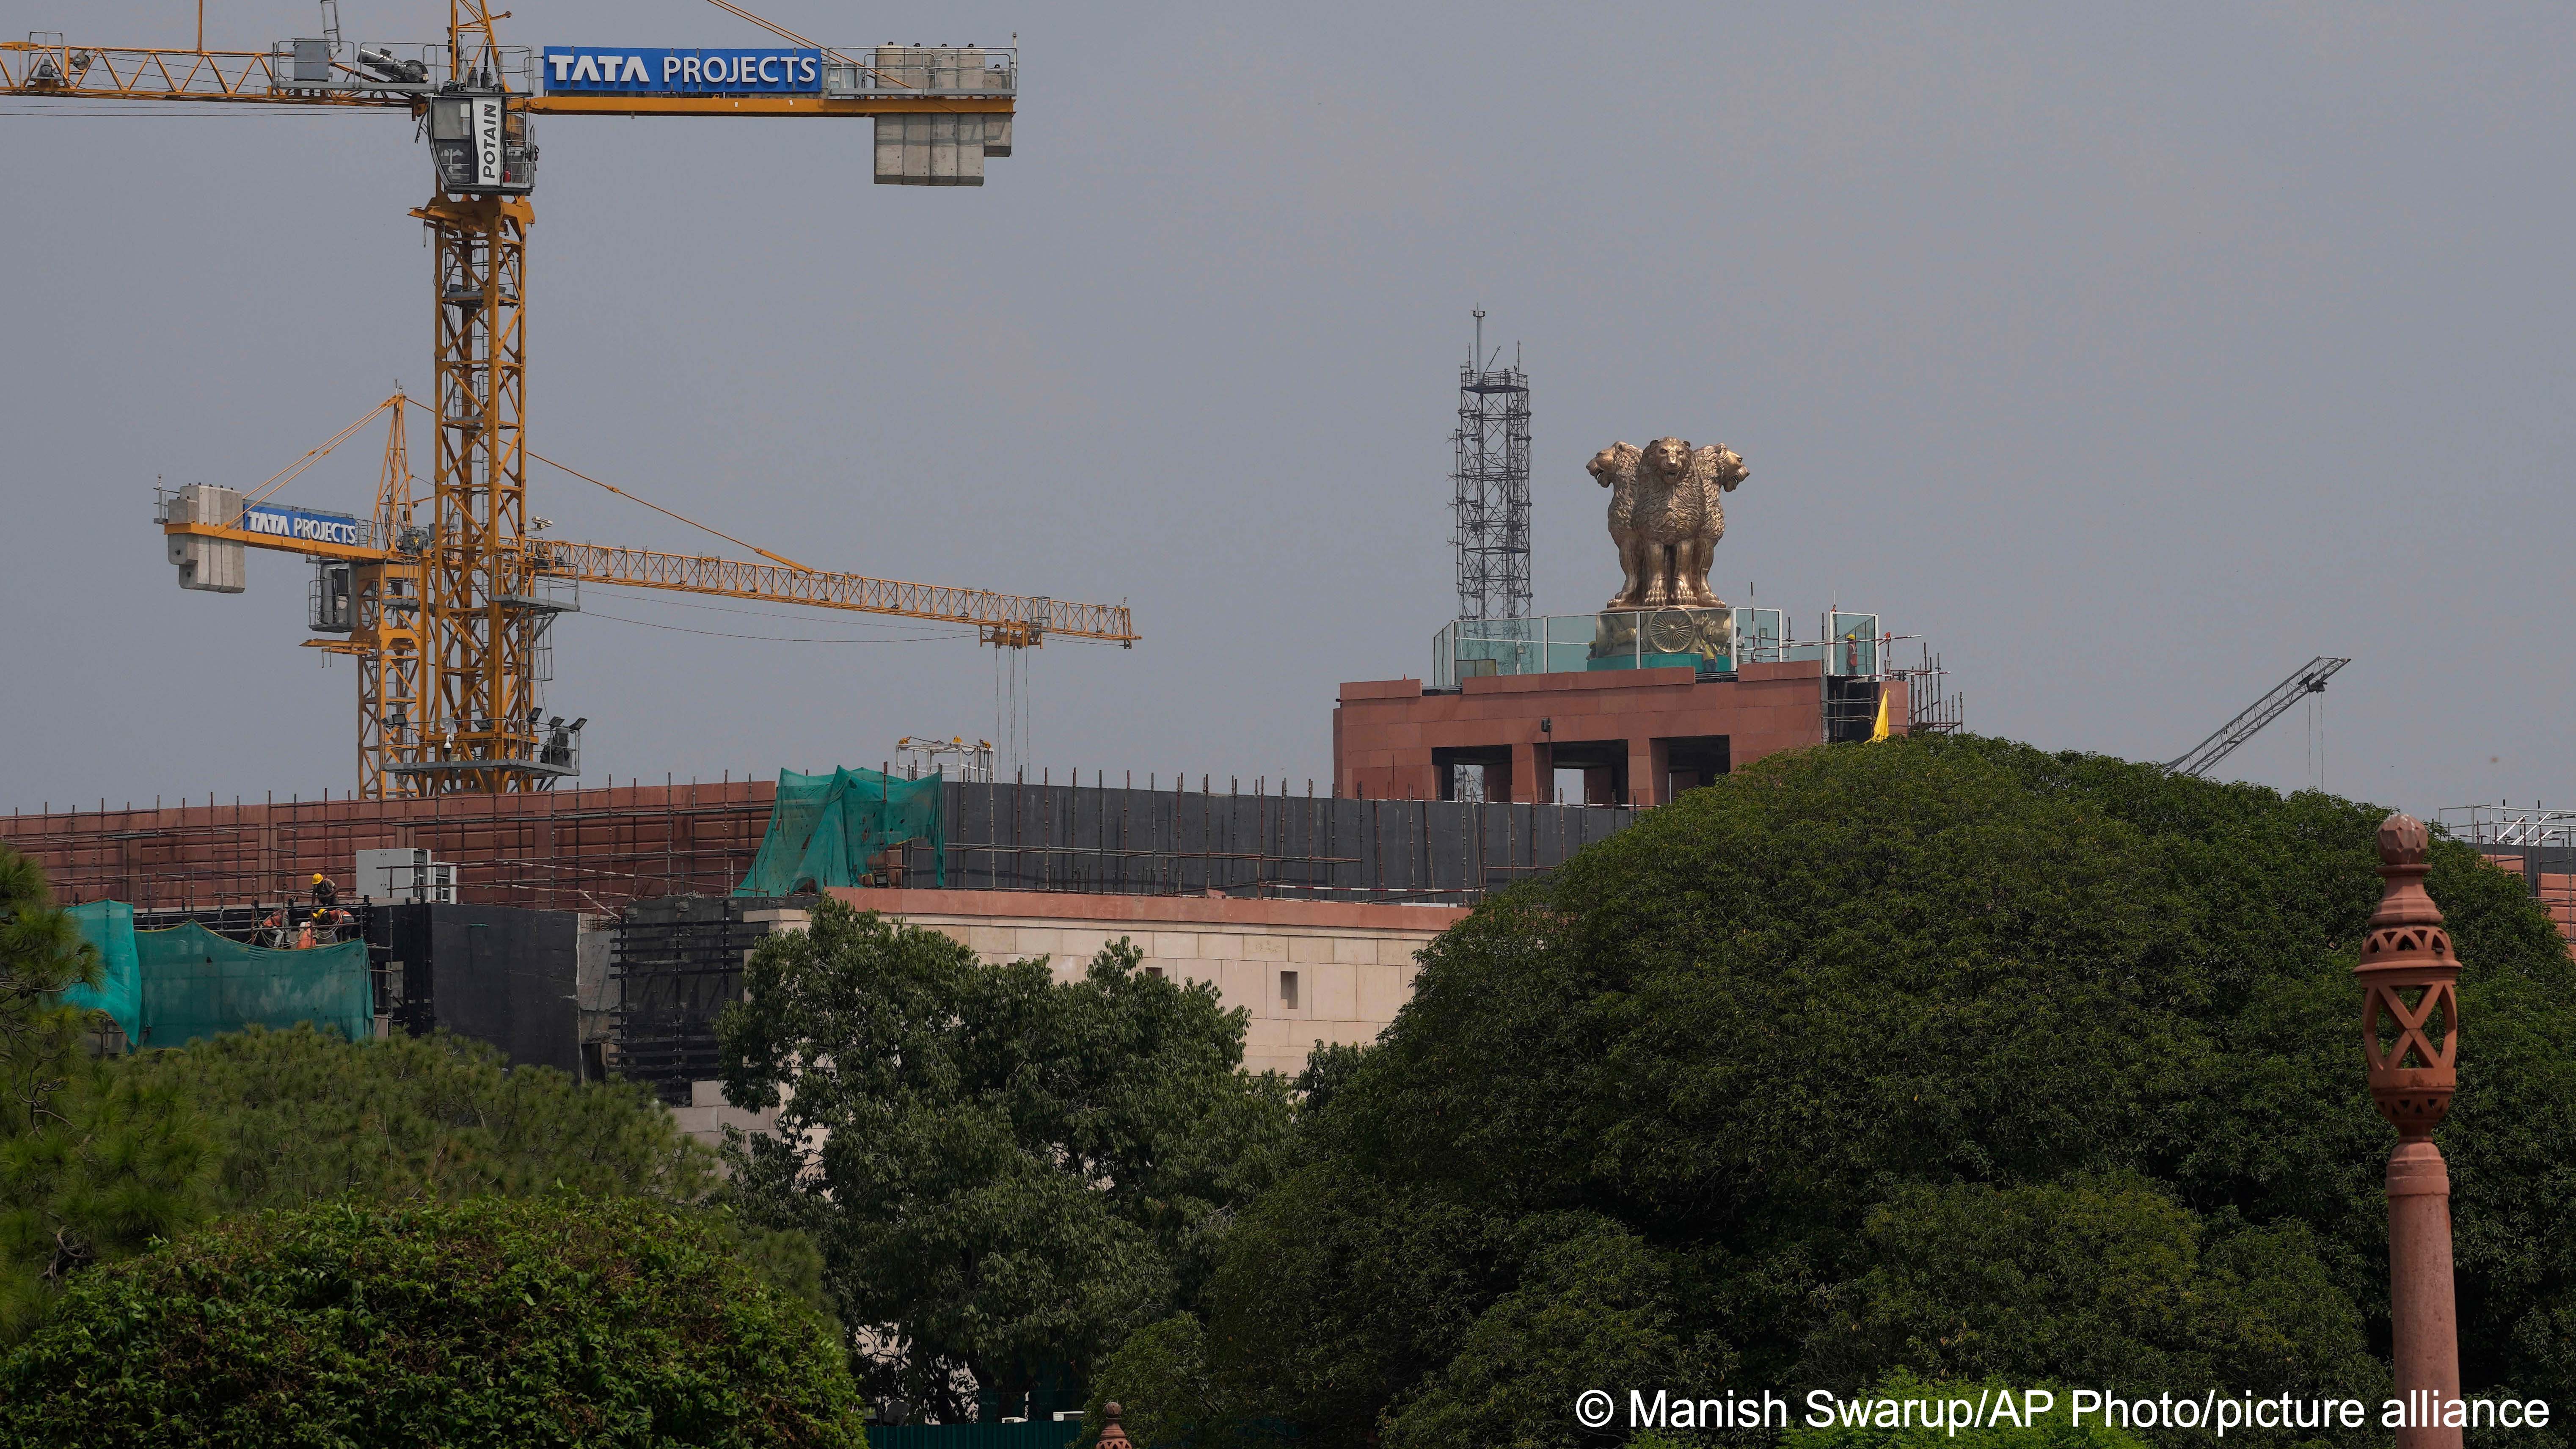 India's national emblem is seen on the roof of country's new parliament building under construction in New Delhi, India, 11 September 2022 (photo: AP Photo/Manish Swarup)